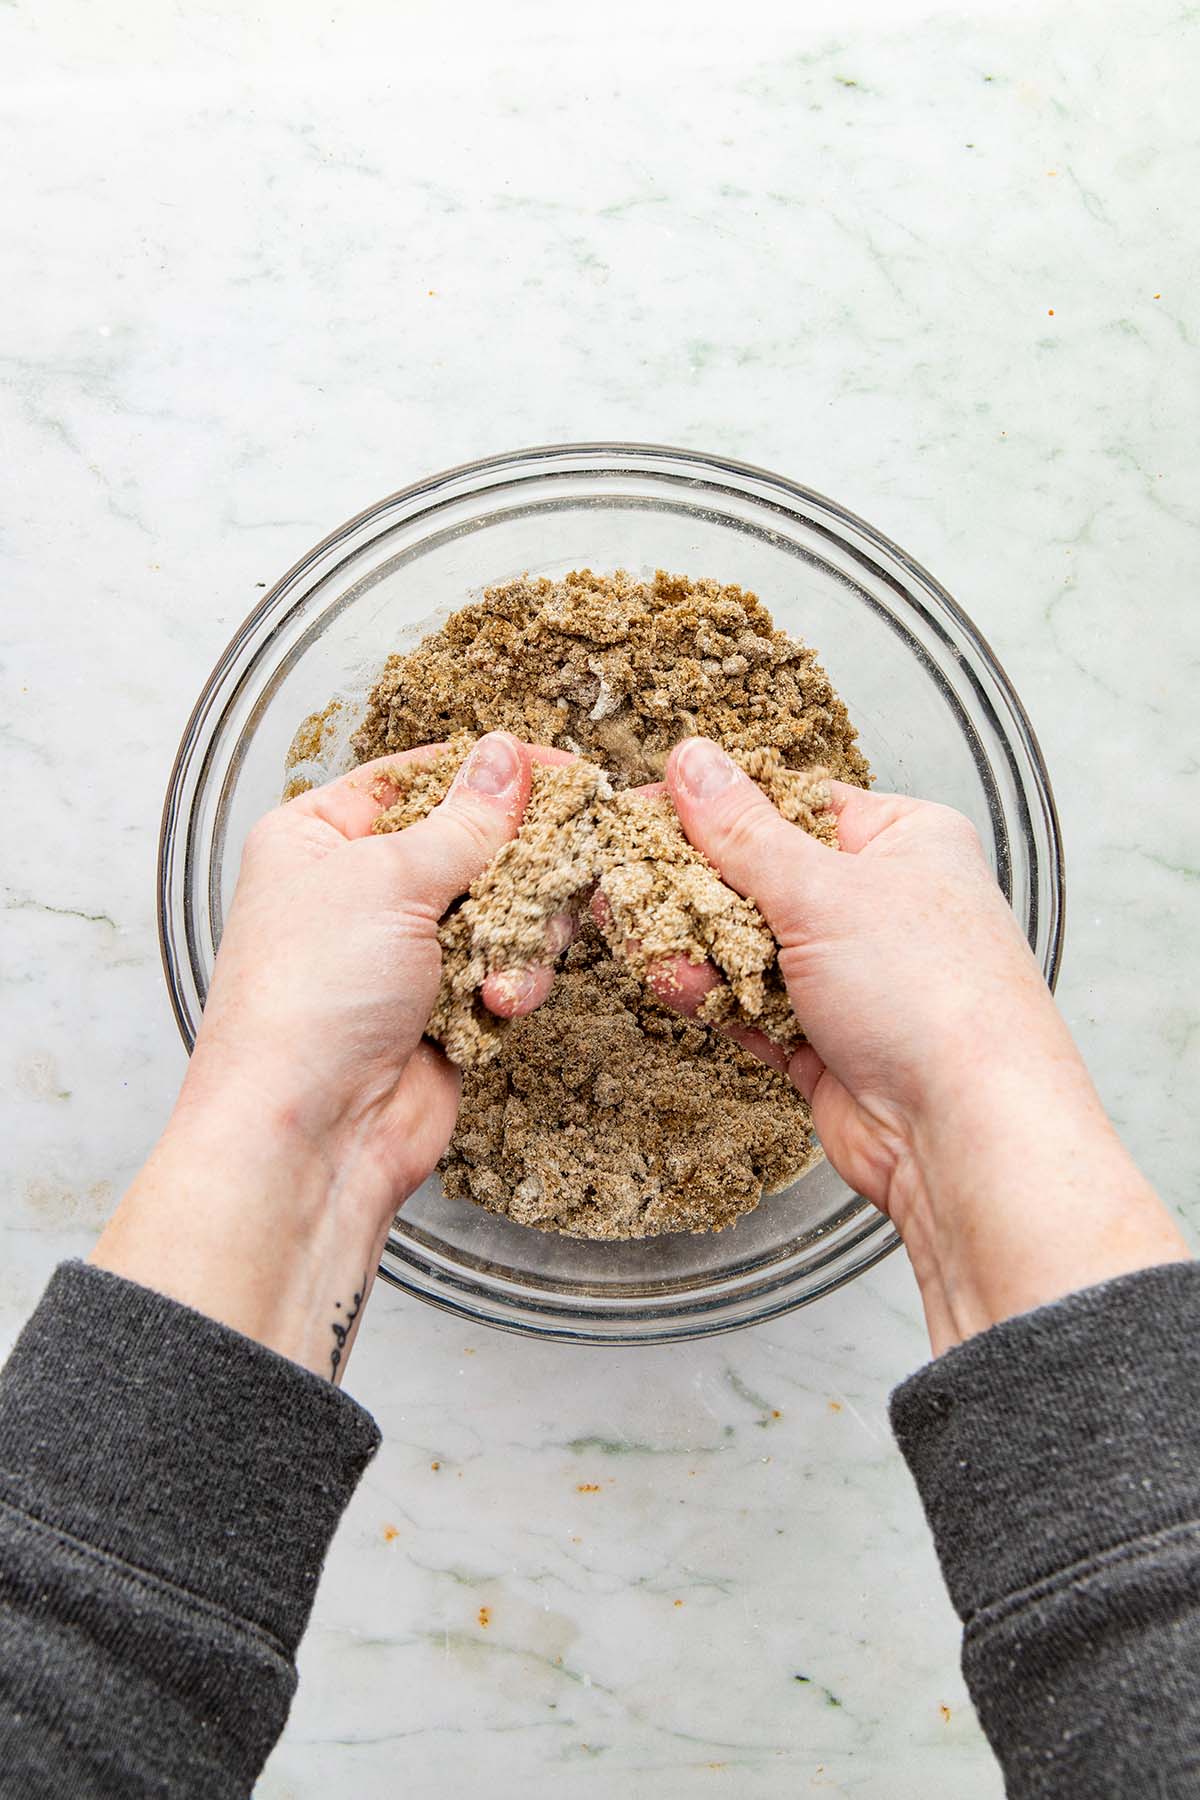 Hands rubbing melted butter into dry crumble topping ingredients.